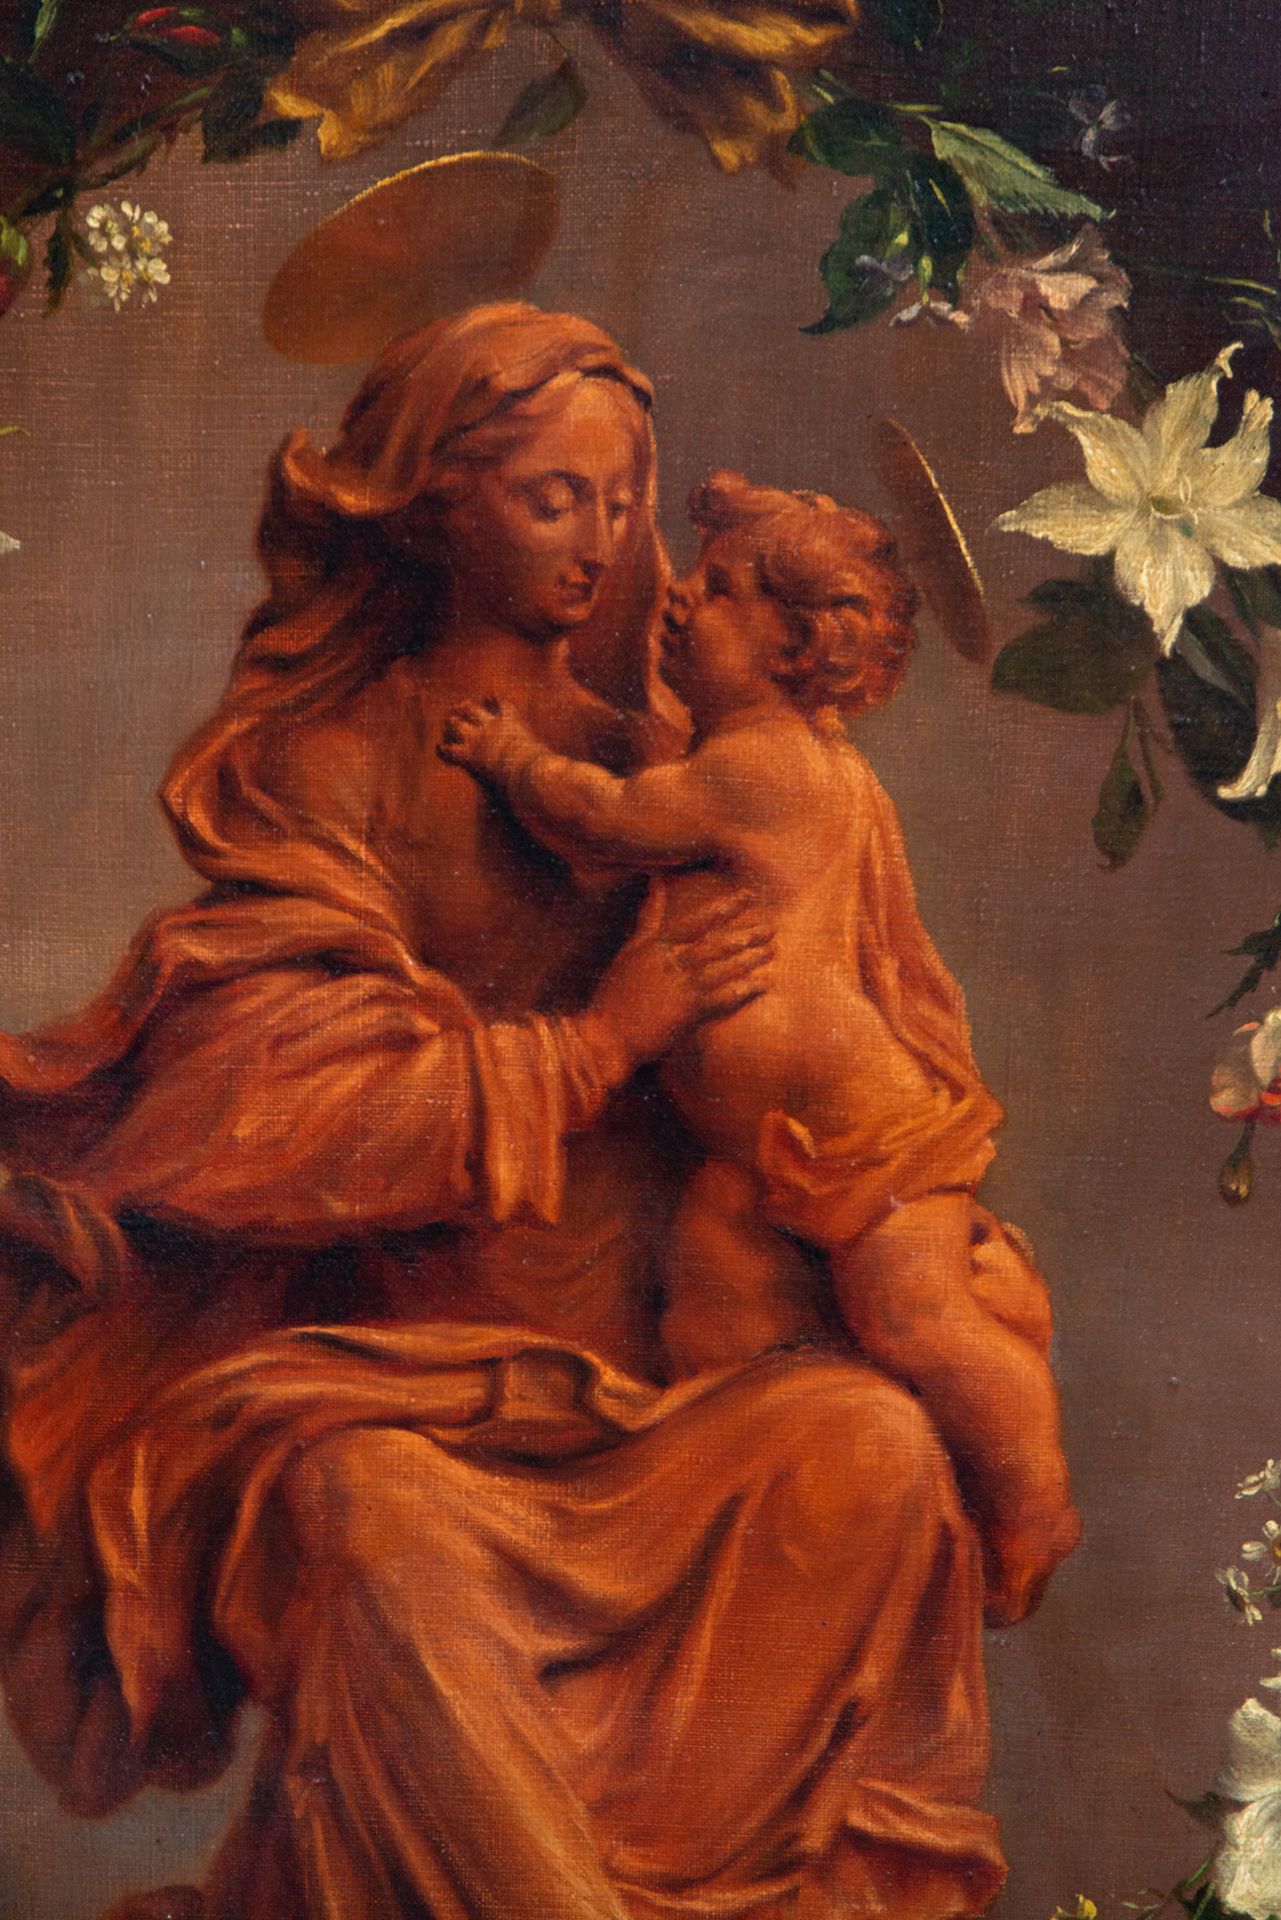 Exceptional "Madonna" with Child Flower Garland, 19th century Italian school - Image 5 of 7